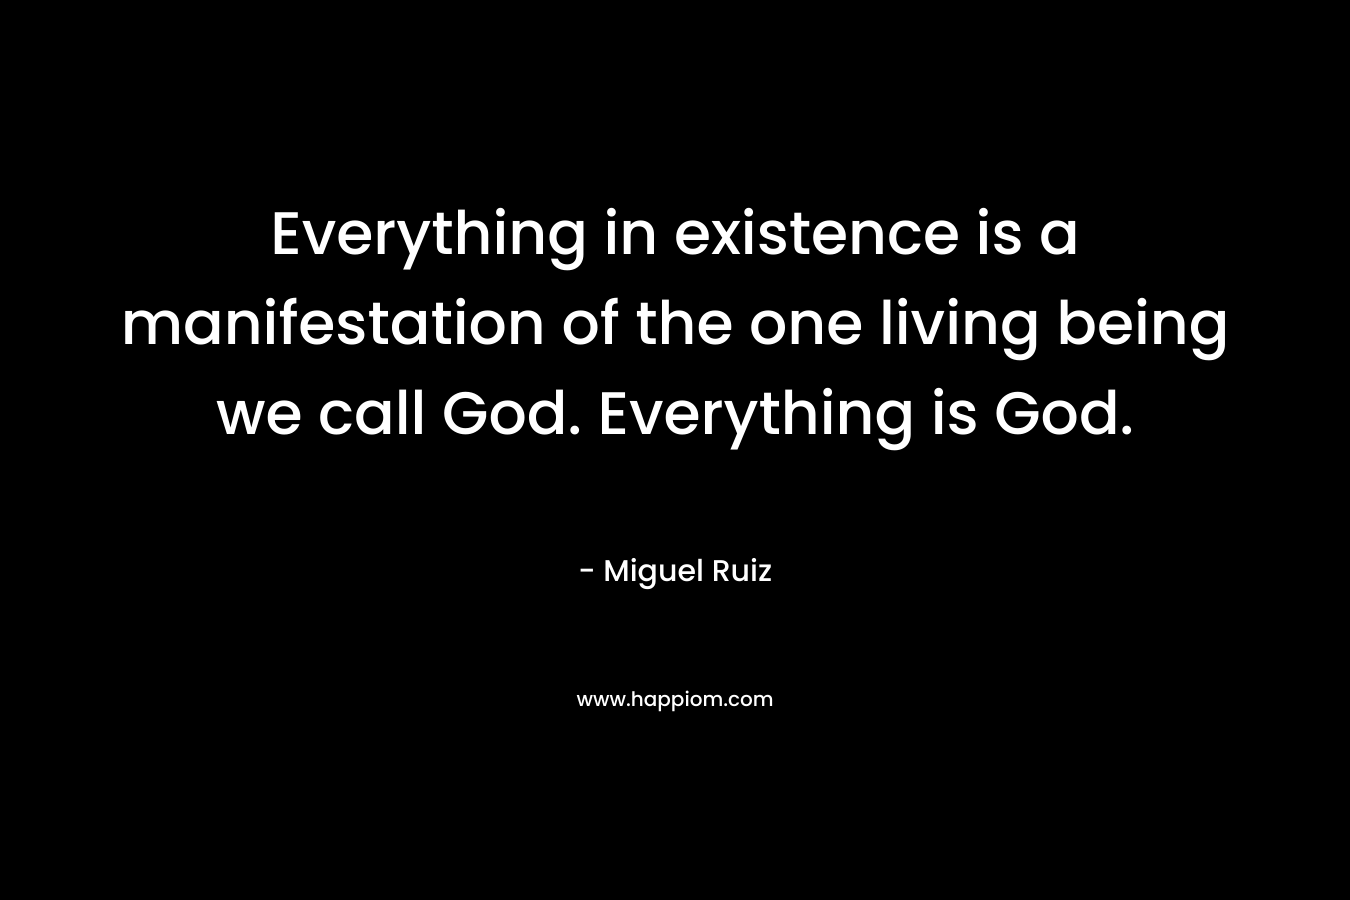 Everything in existence is a manifestation of the one living being we call God. Everything is God. – Miguel Ruiz